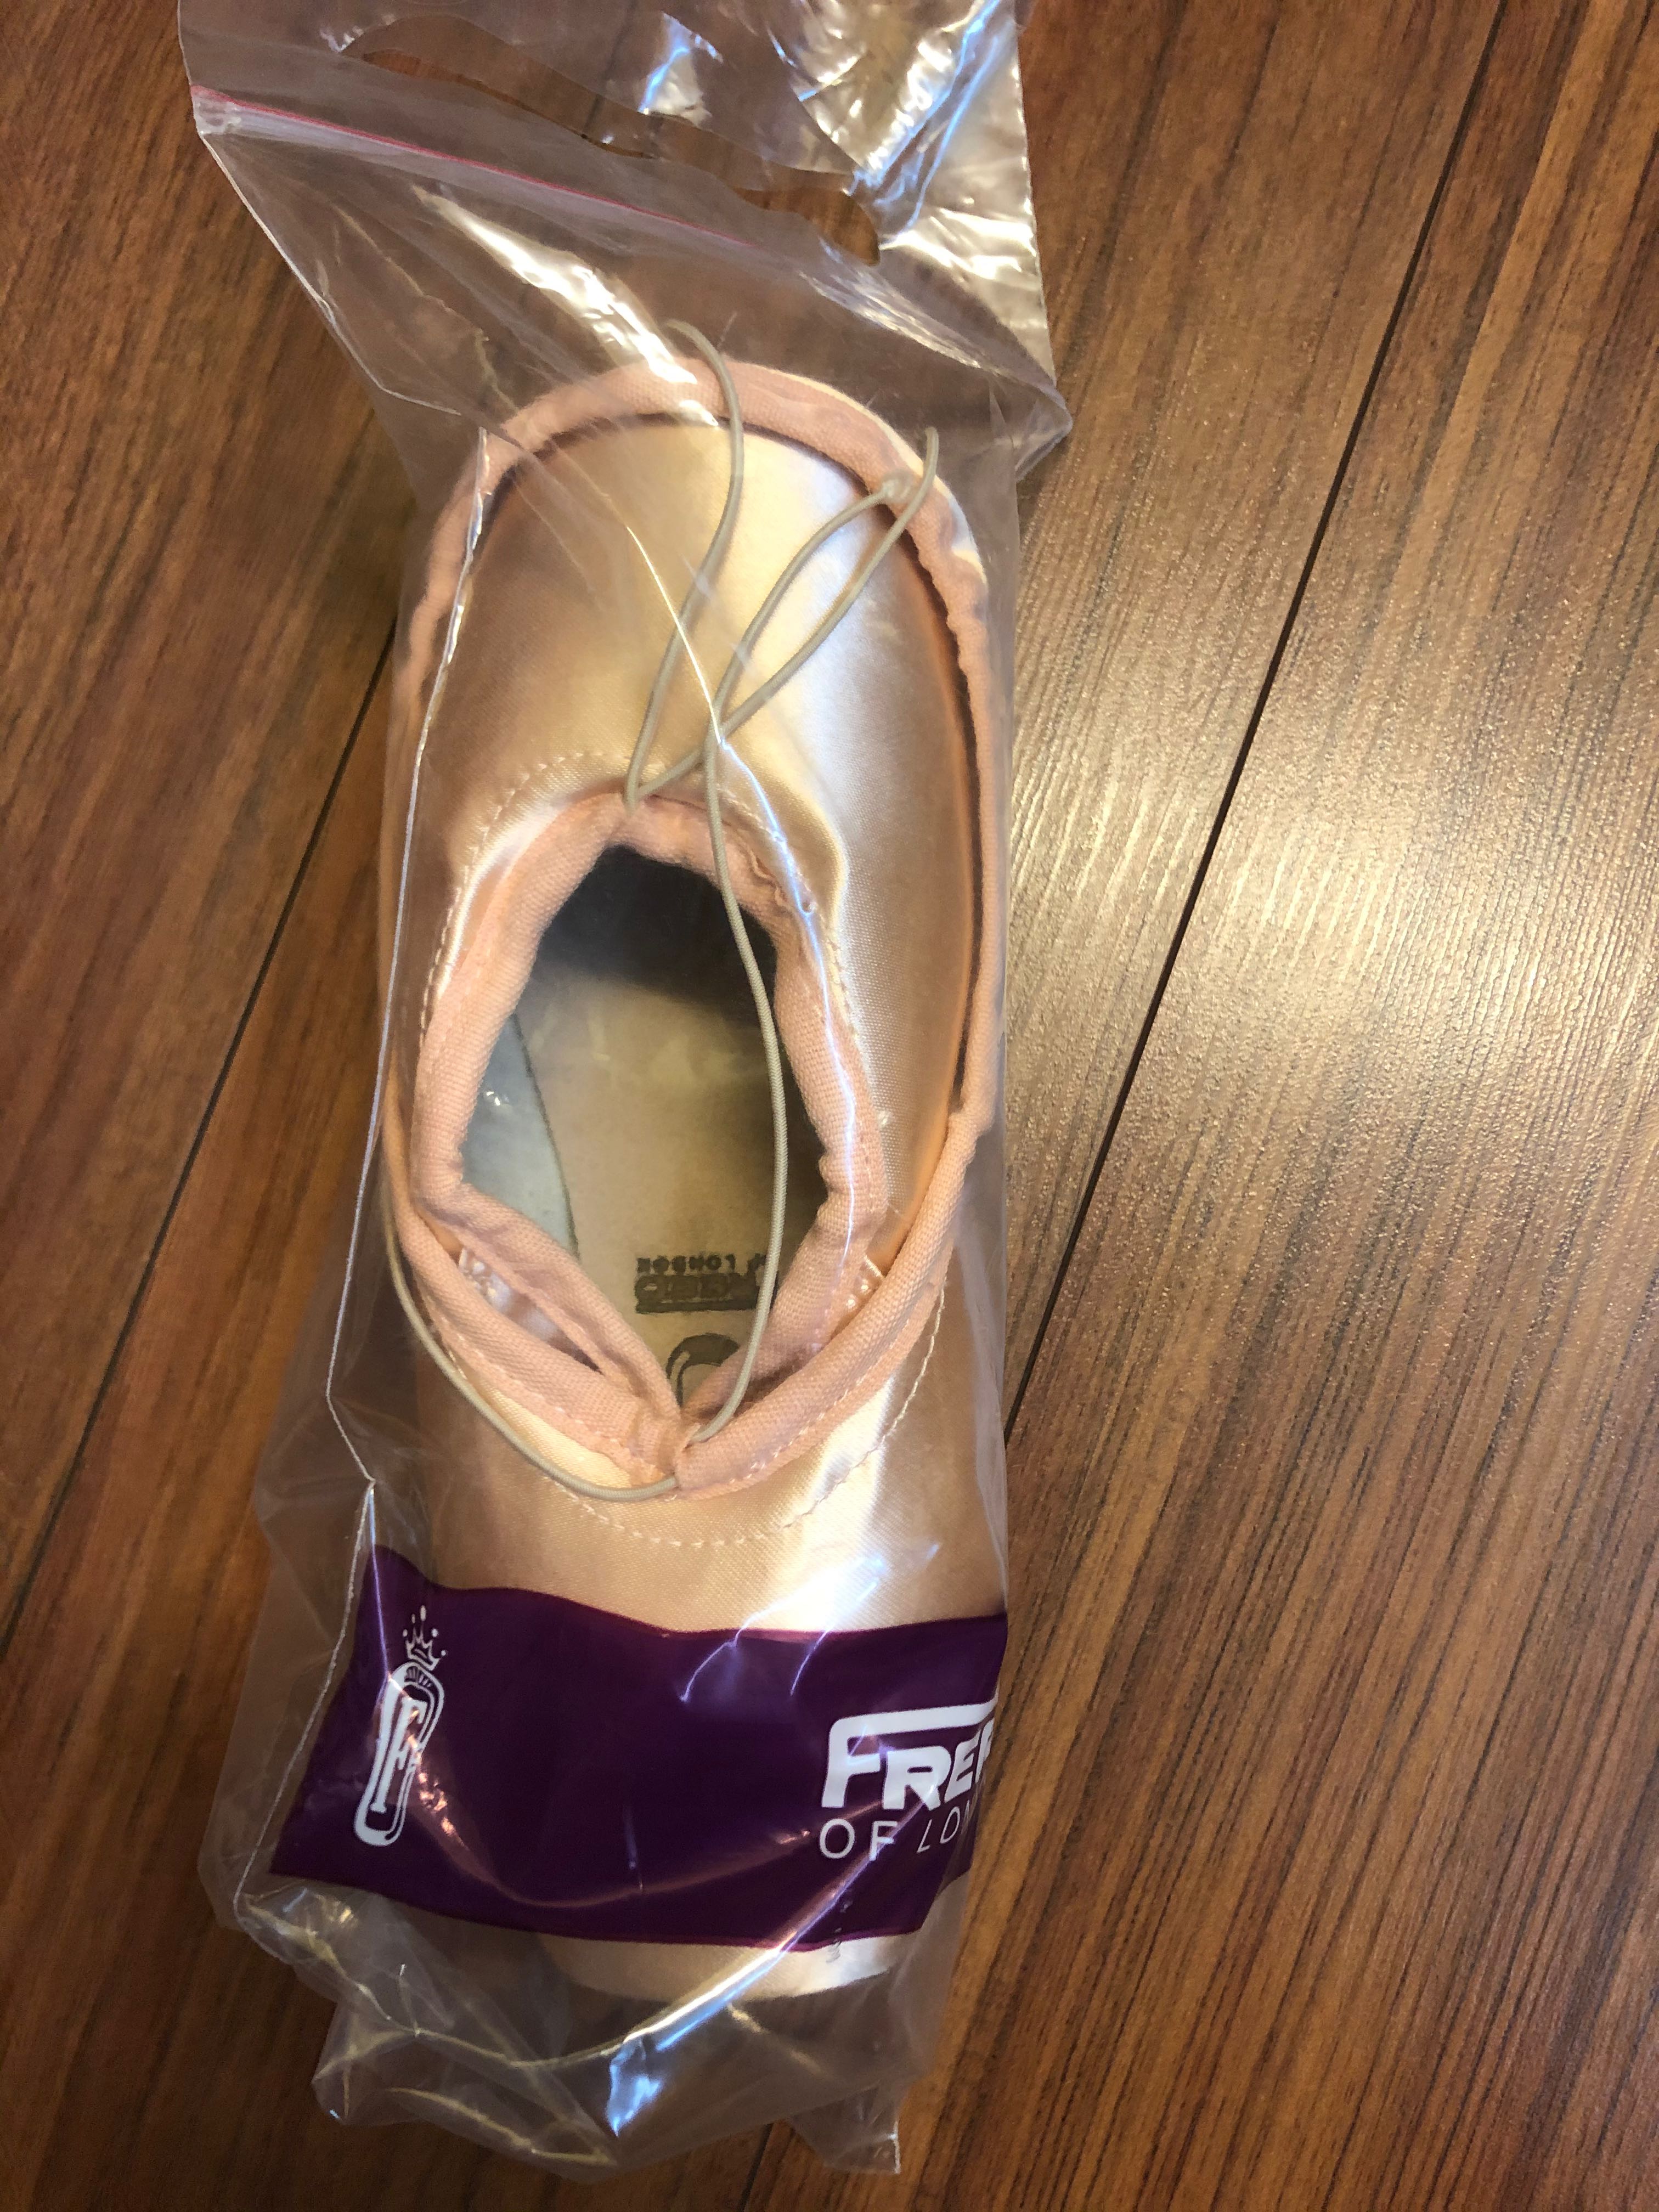 freed pointe shoe makers chart